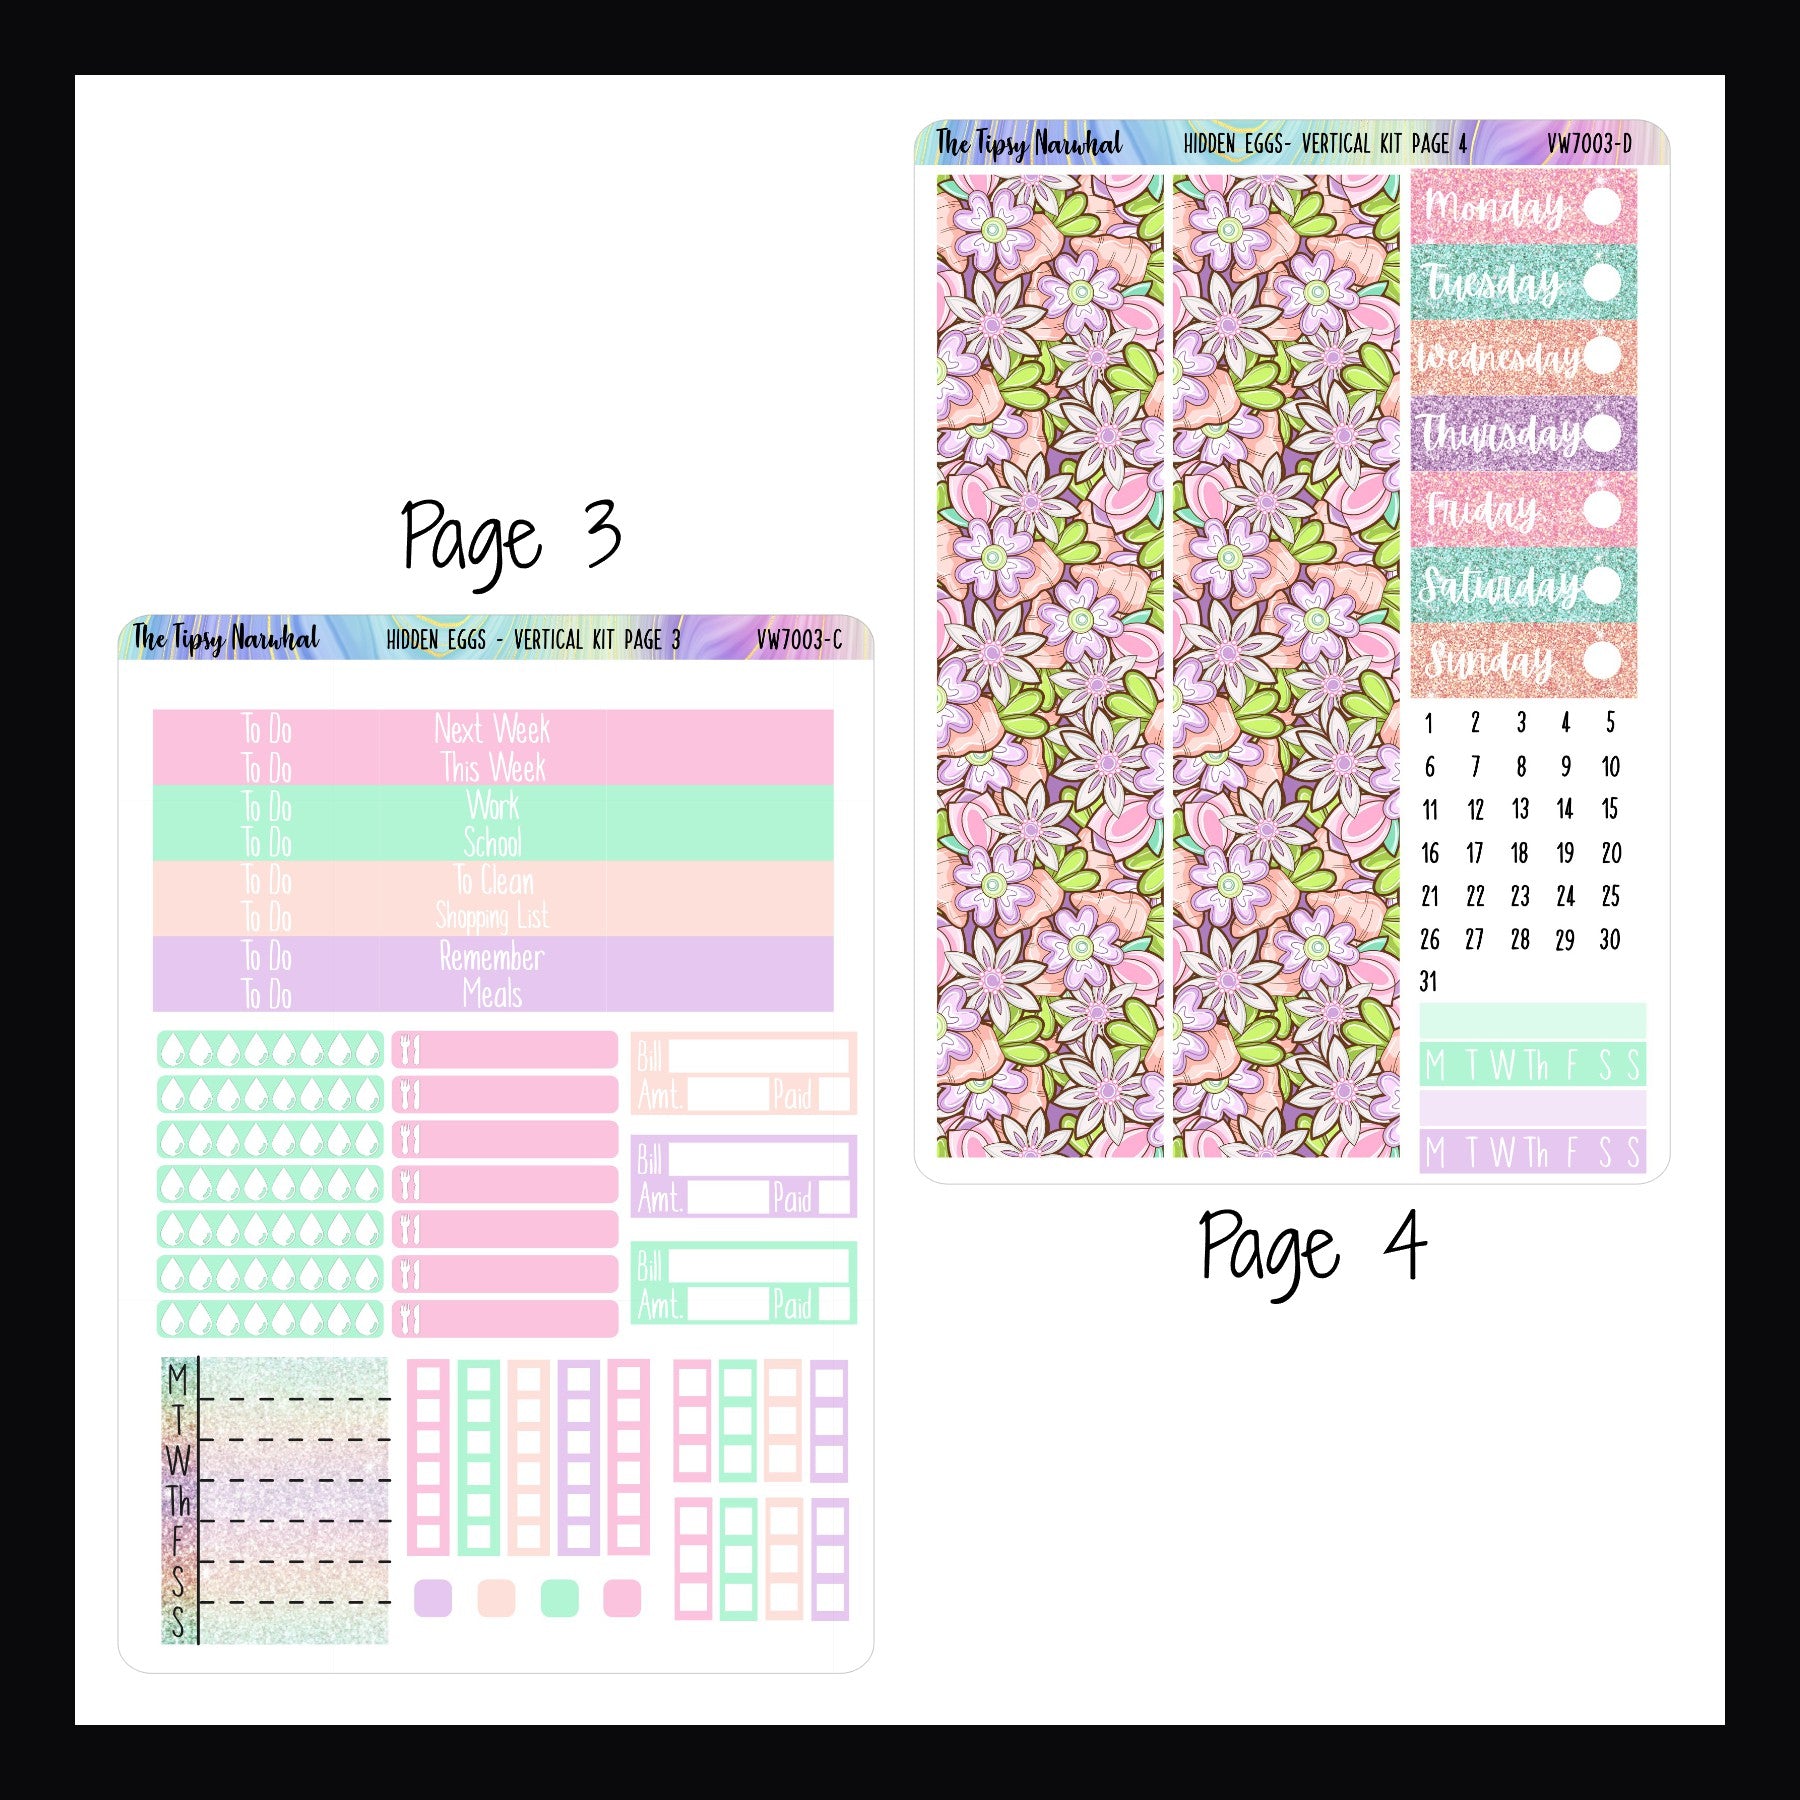 Digital Hidden Eggs Vertical Kit Pages 3 and 4. Page 3 features headers, checklists, bill tracking, meal tracking and hydration tracking stickers.  Page 4 features two large washi strips, date covers and habit tracking stickers. 